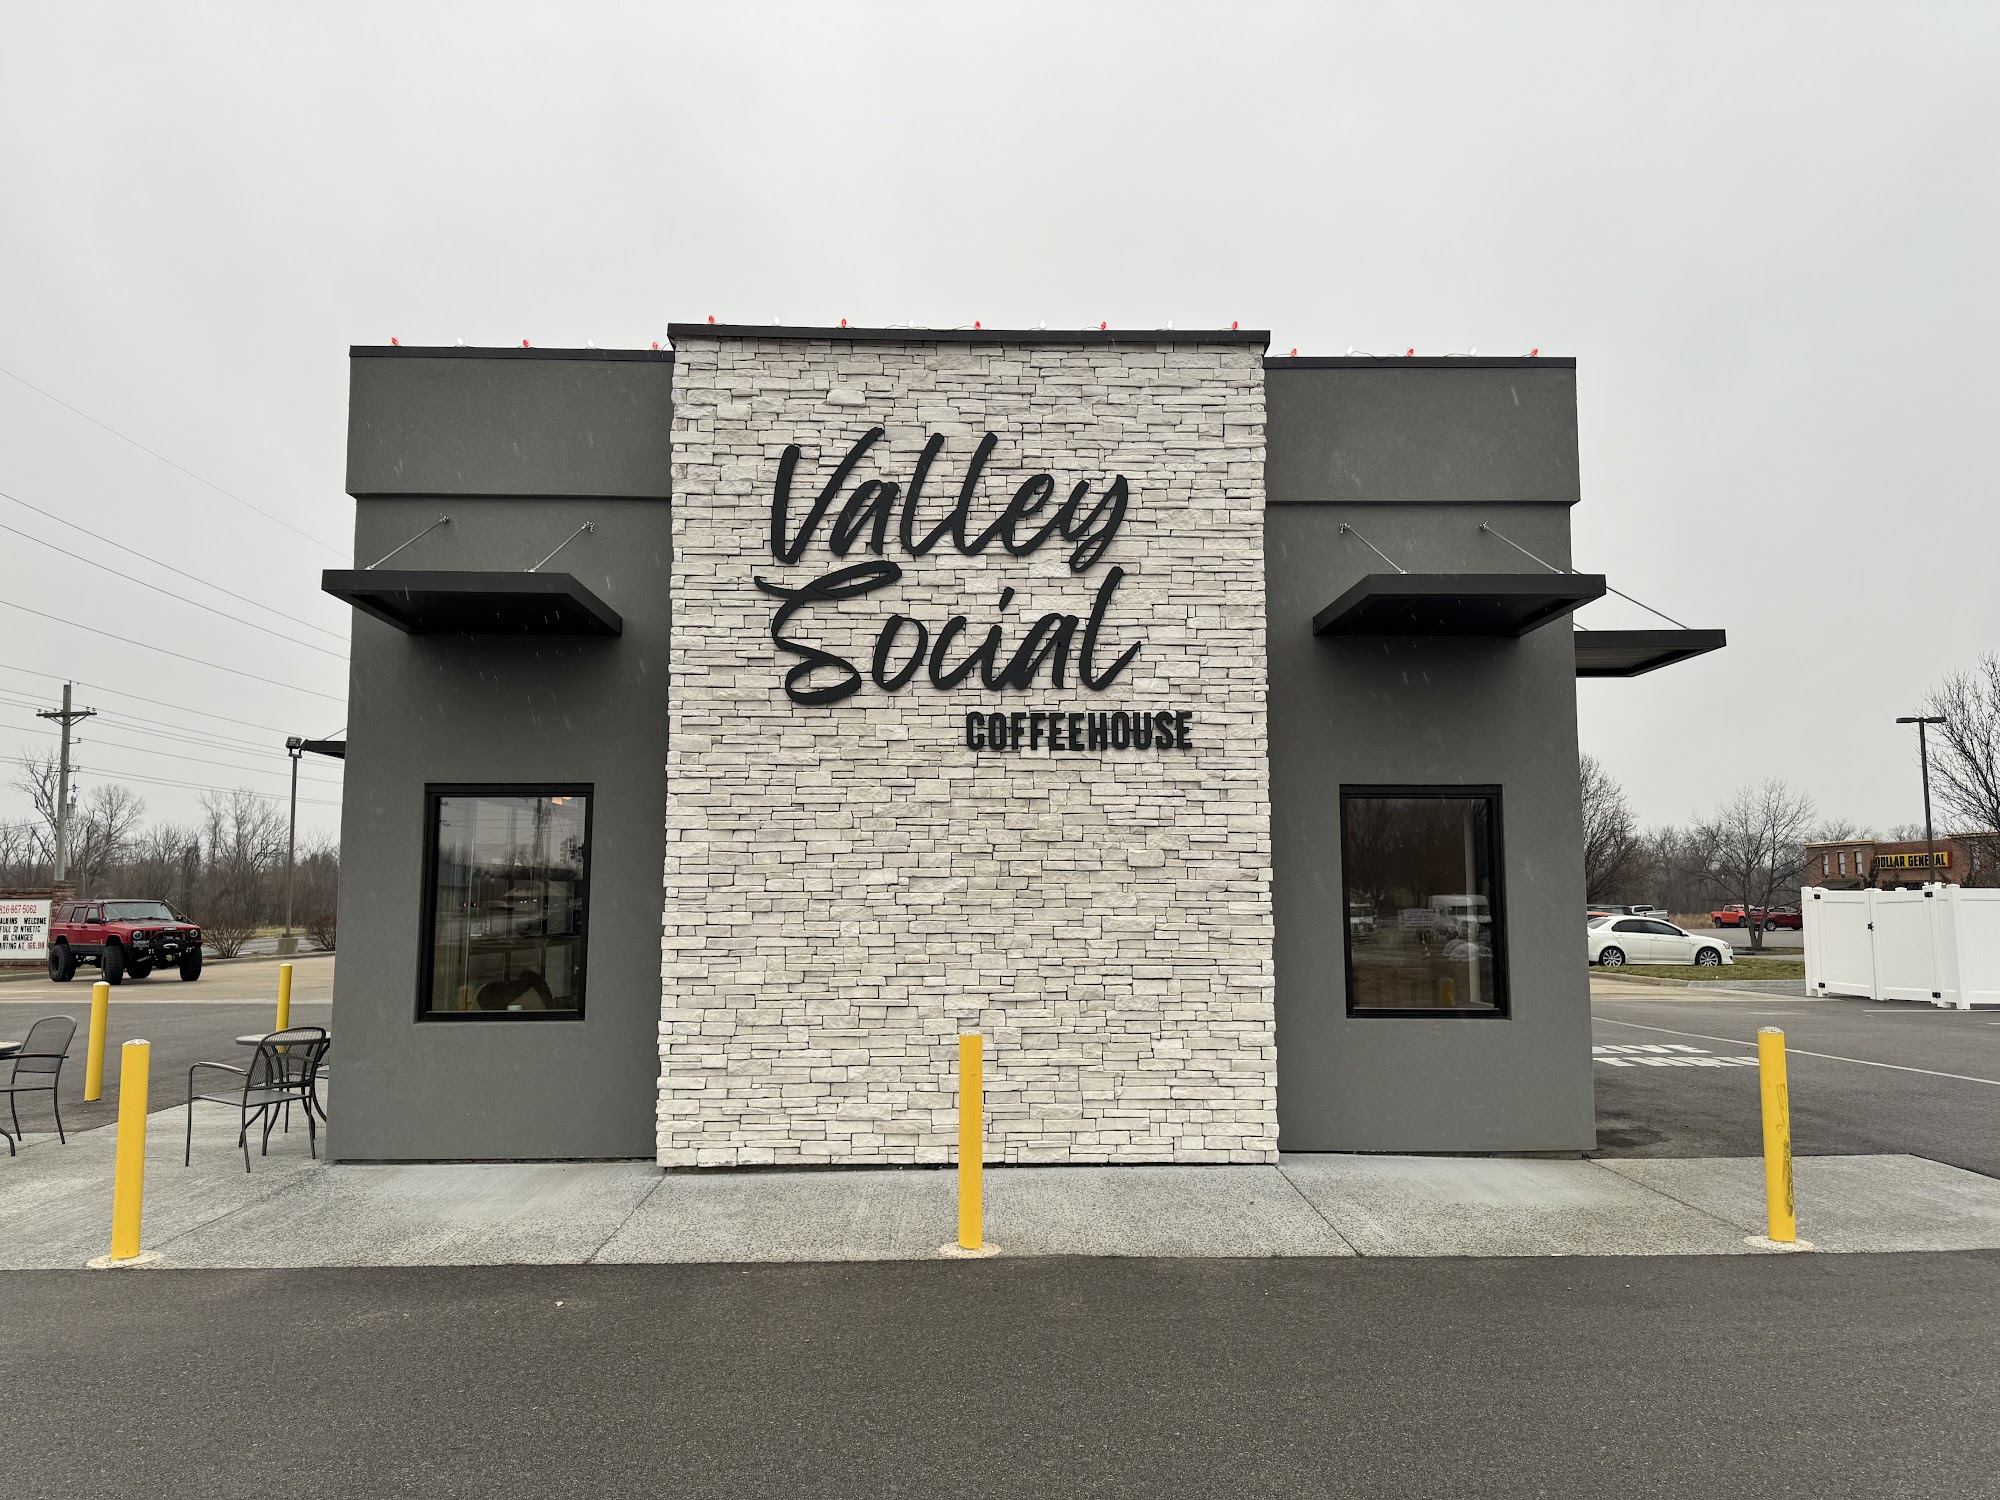 Valley Social Coffeehouse